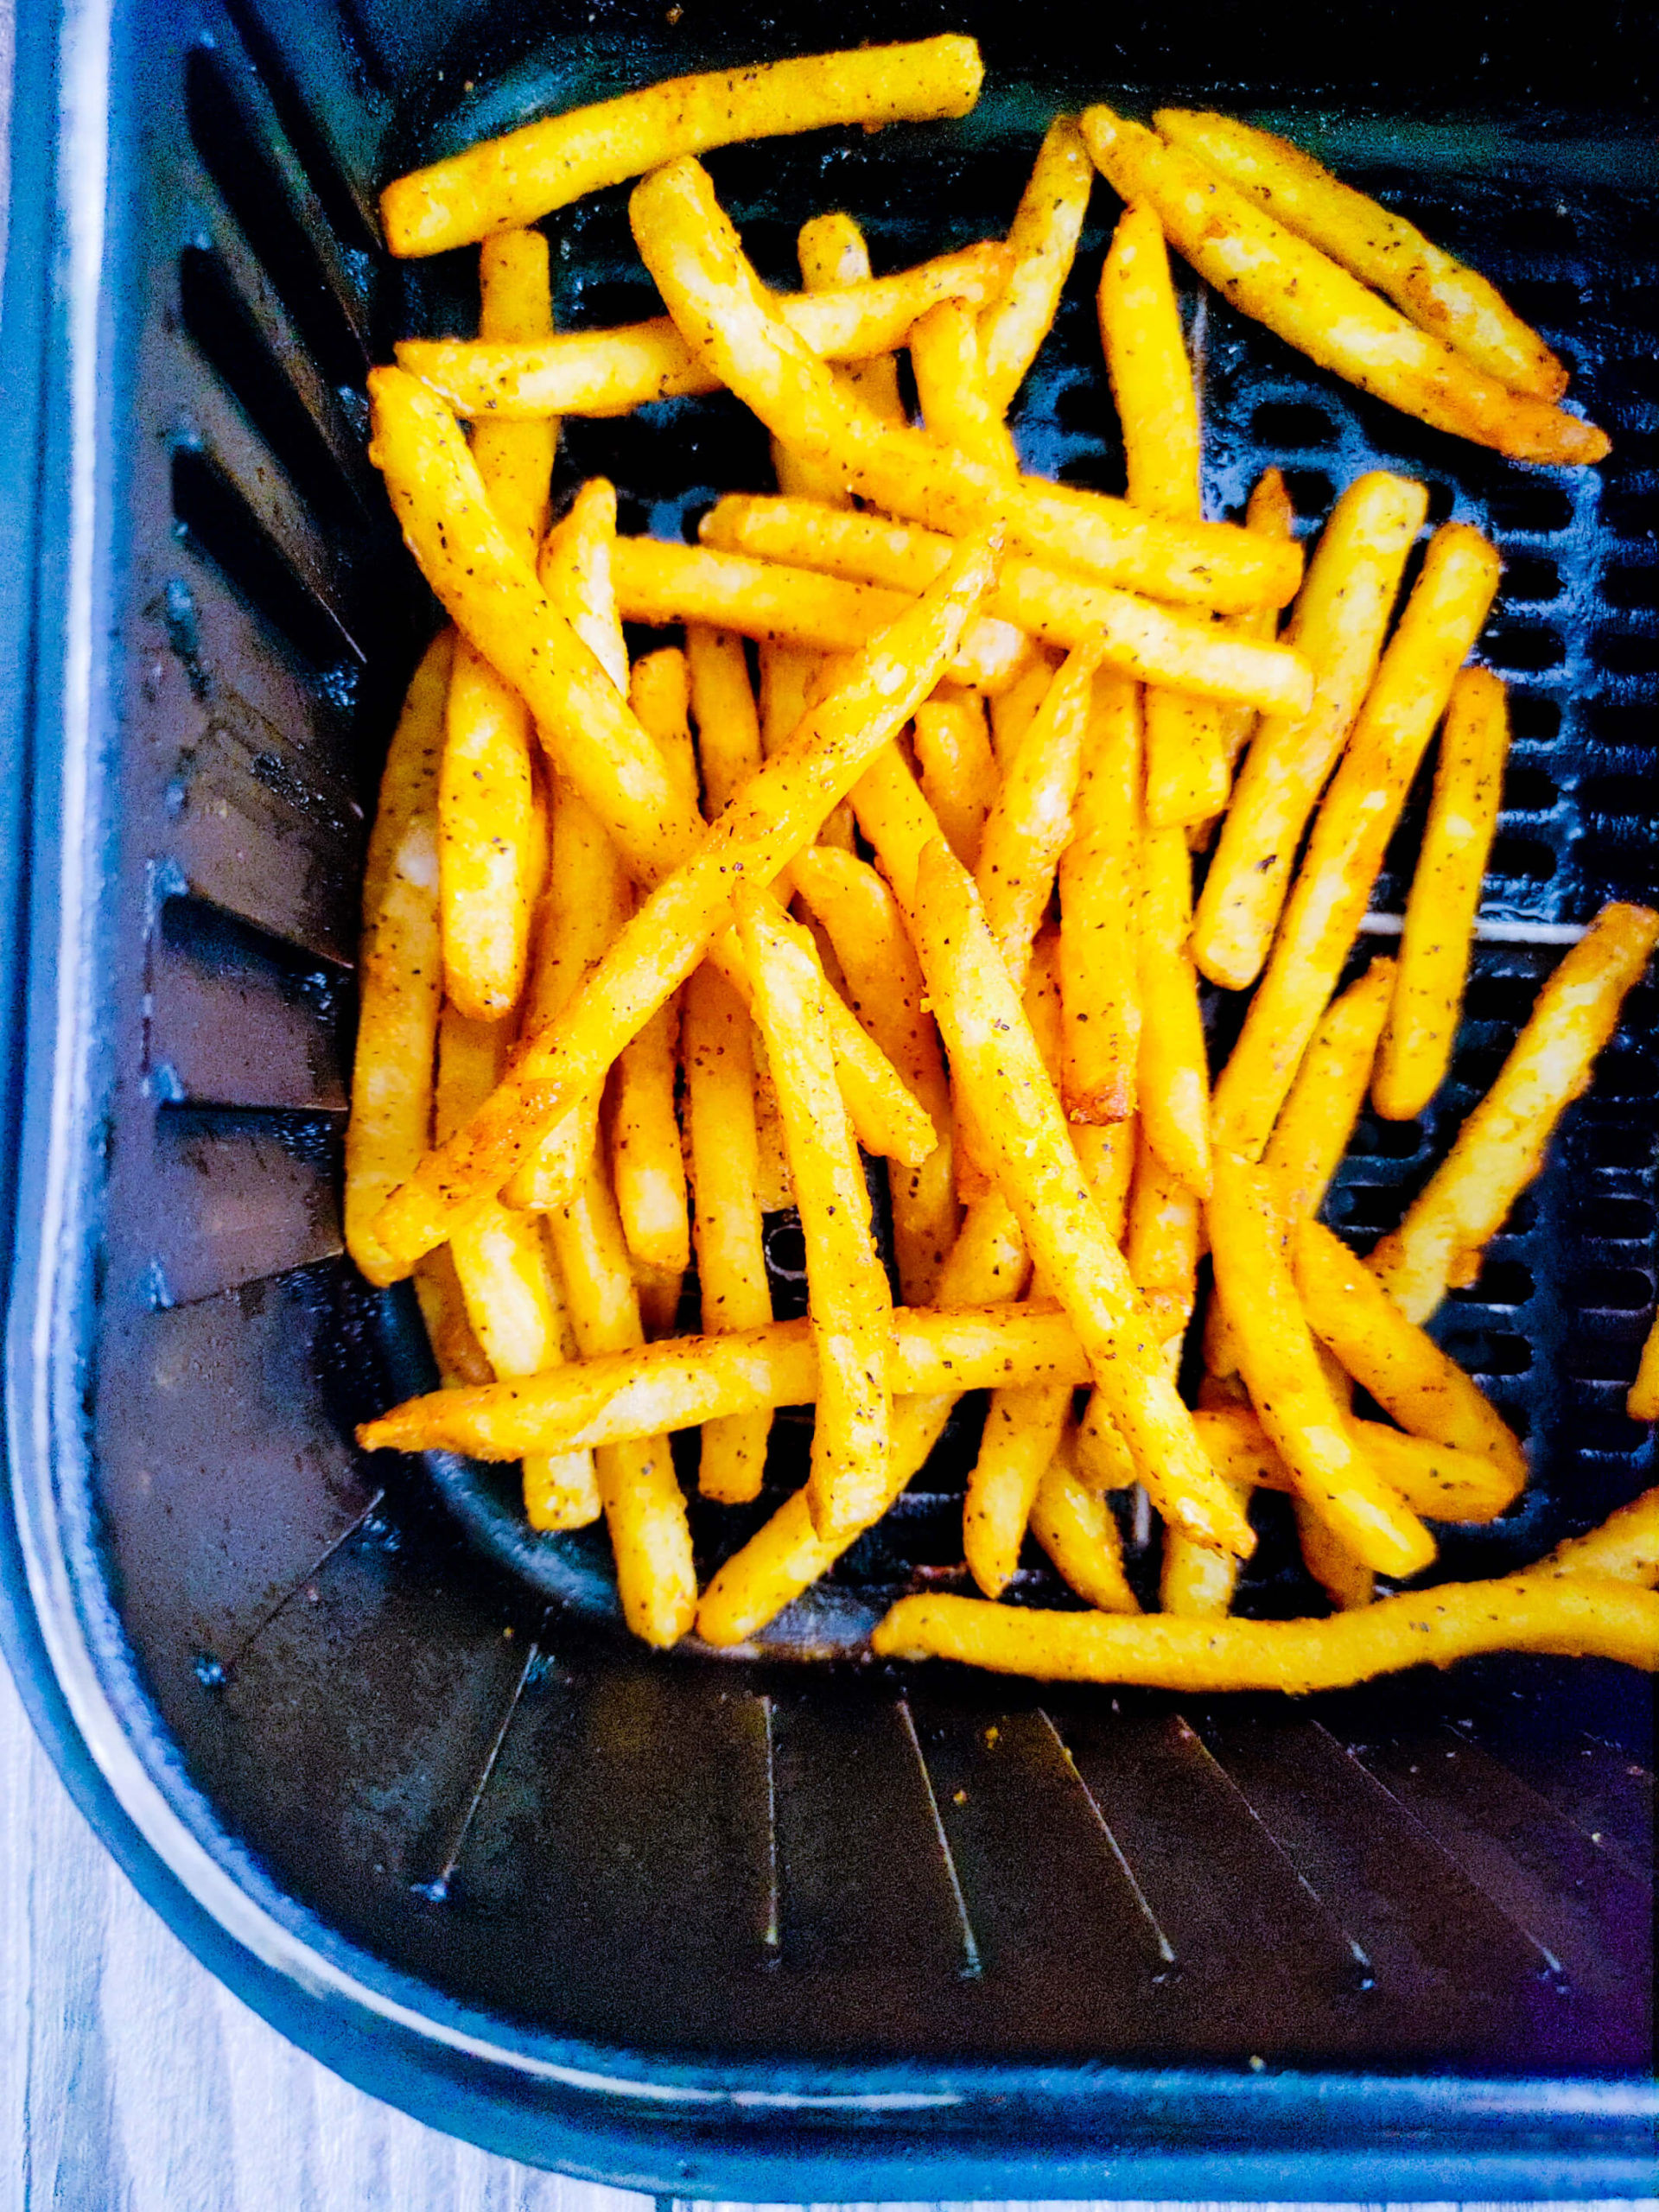 CRISPY AIR FRIED FRENCH FRIES